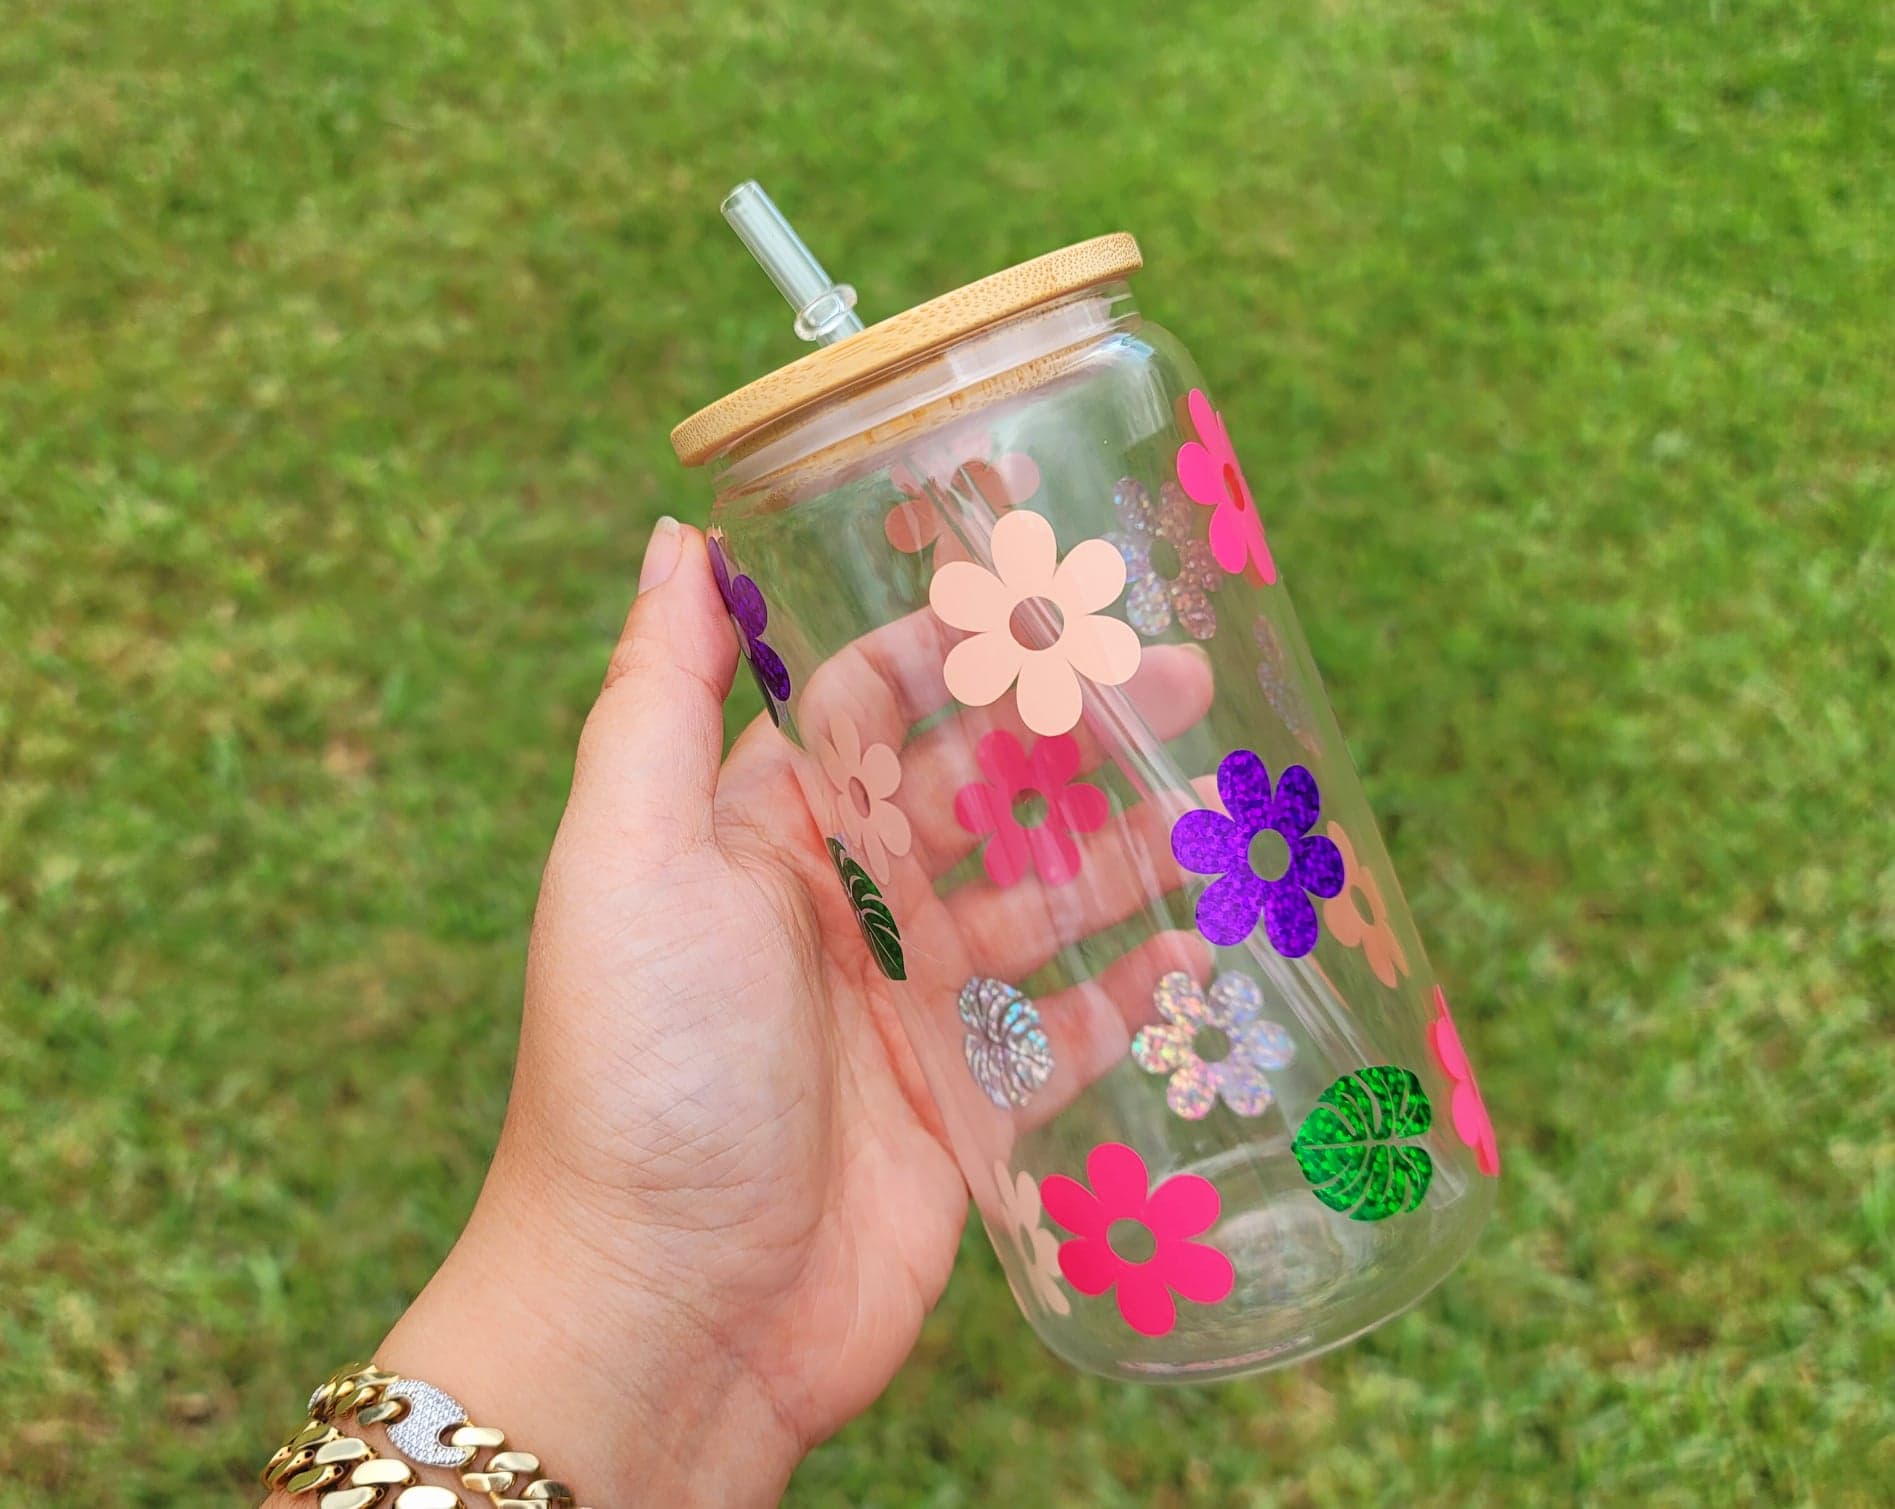 Daisy Cup Iced Coffee Cup Glass - Retro Flower Glass Jar - Daisy Coffee Glass Cup 16 oz